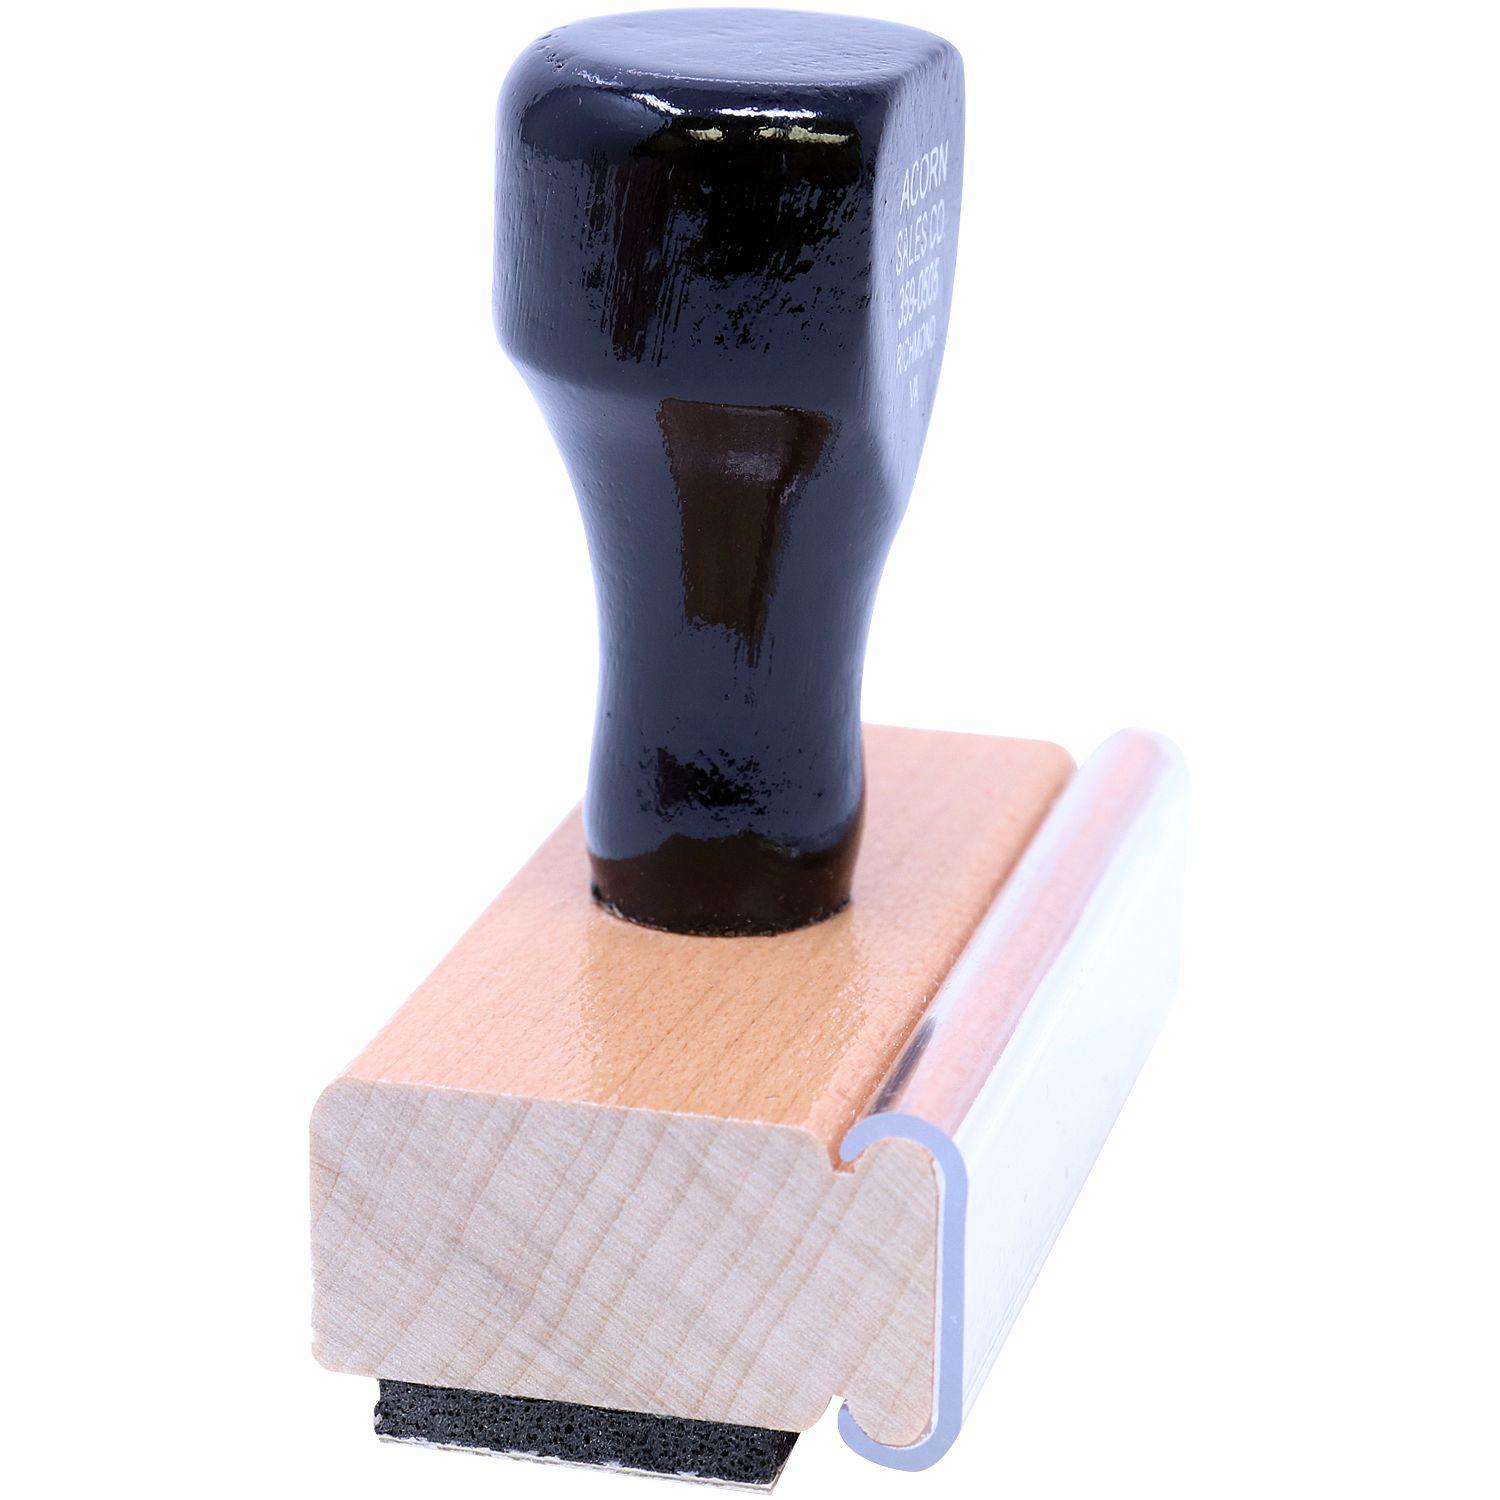 Side View of Large Living Will Rubber Stamp at an Angle